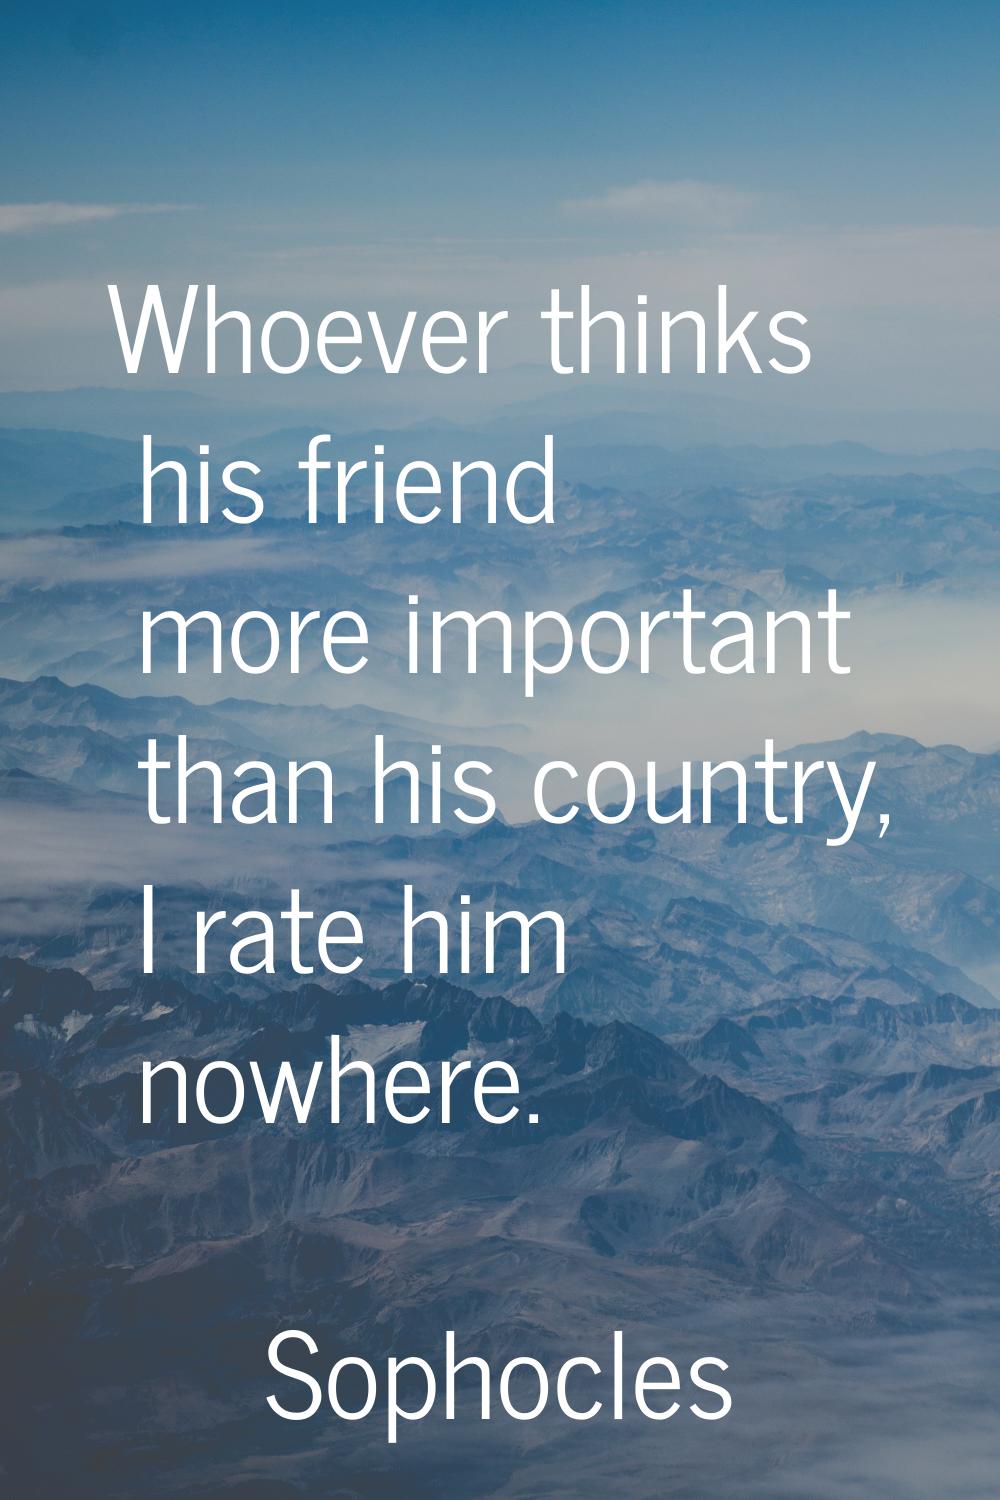 Whoever thinks his friend more important than his country, I rate him nowhere.